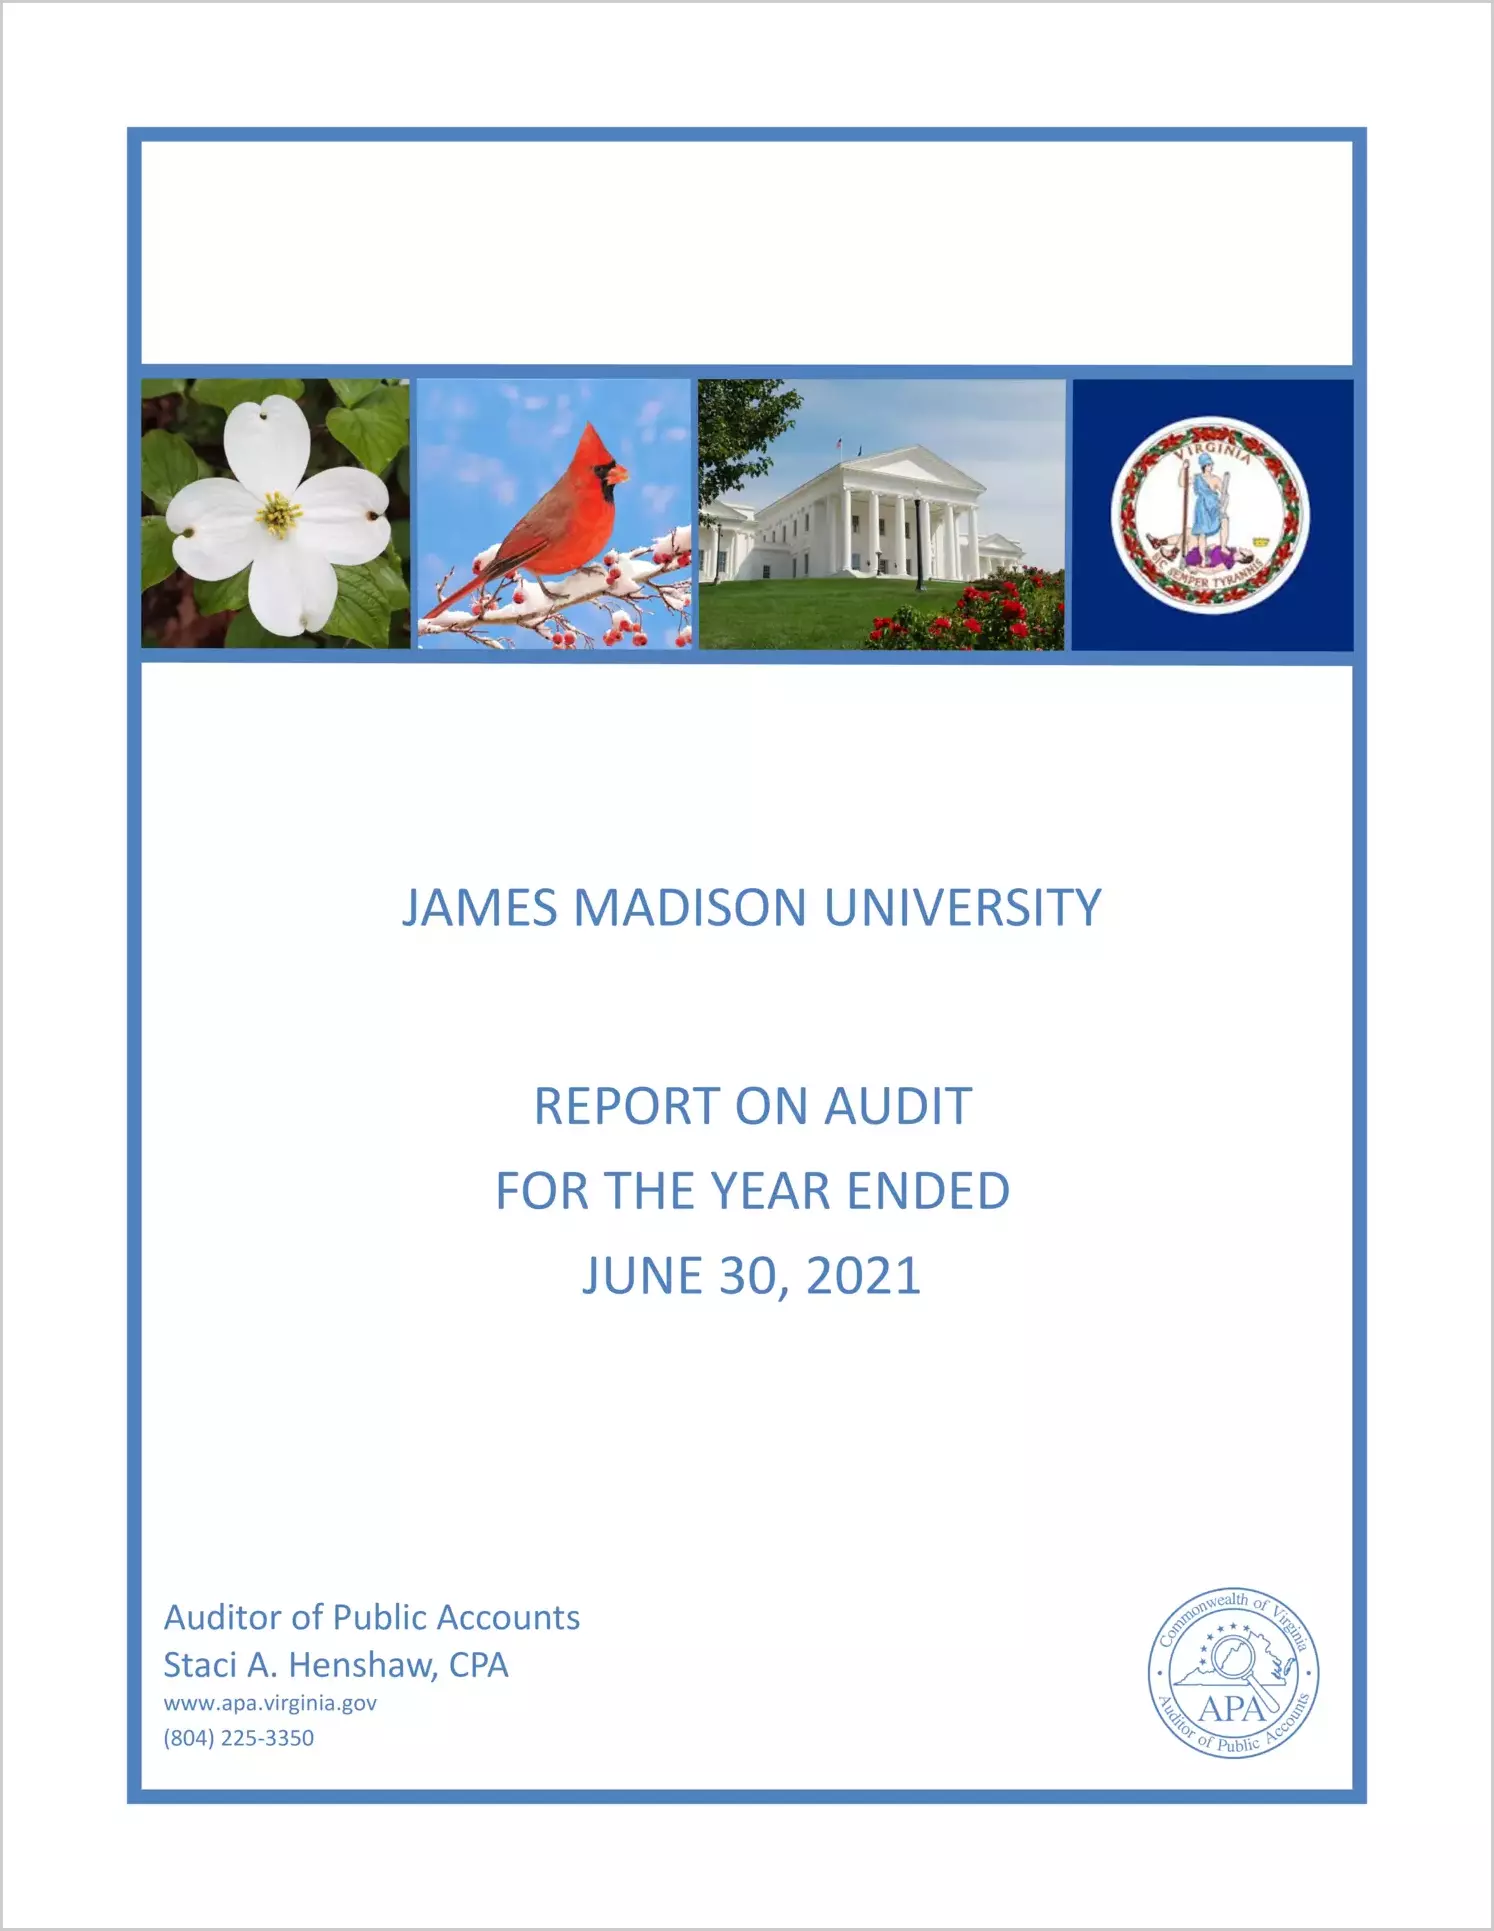 James Madison University for the year ended June 30, 2021